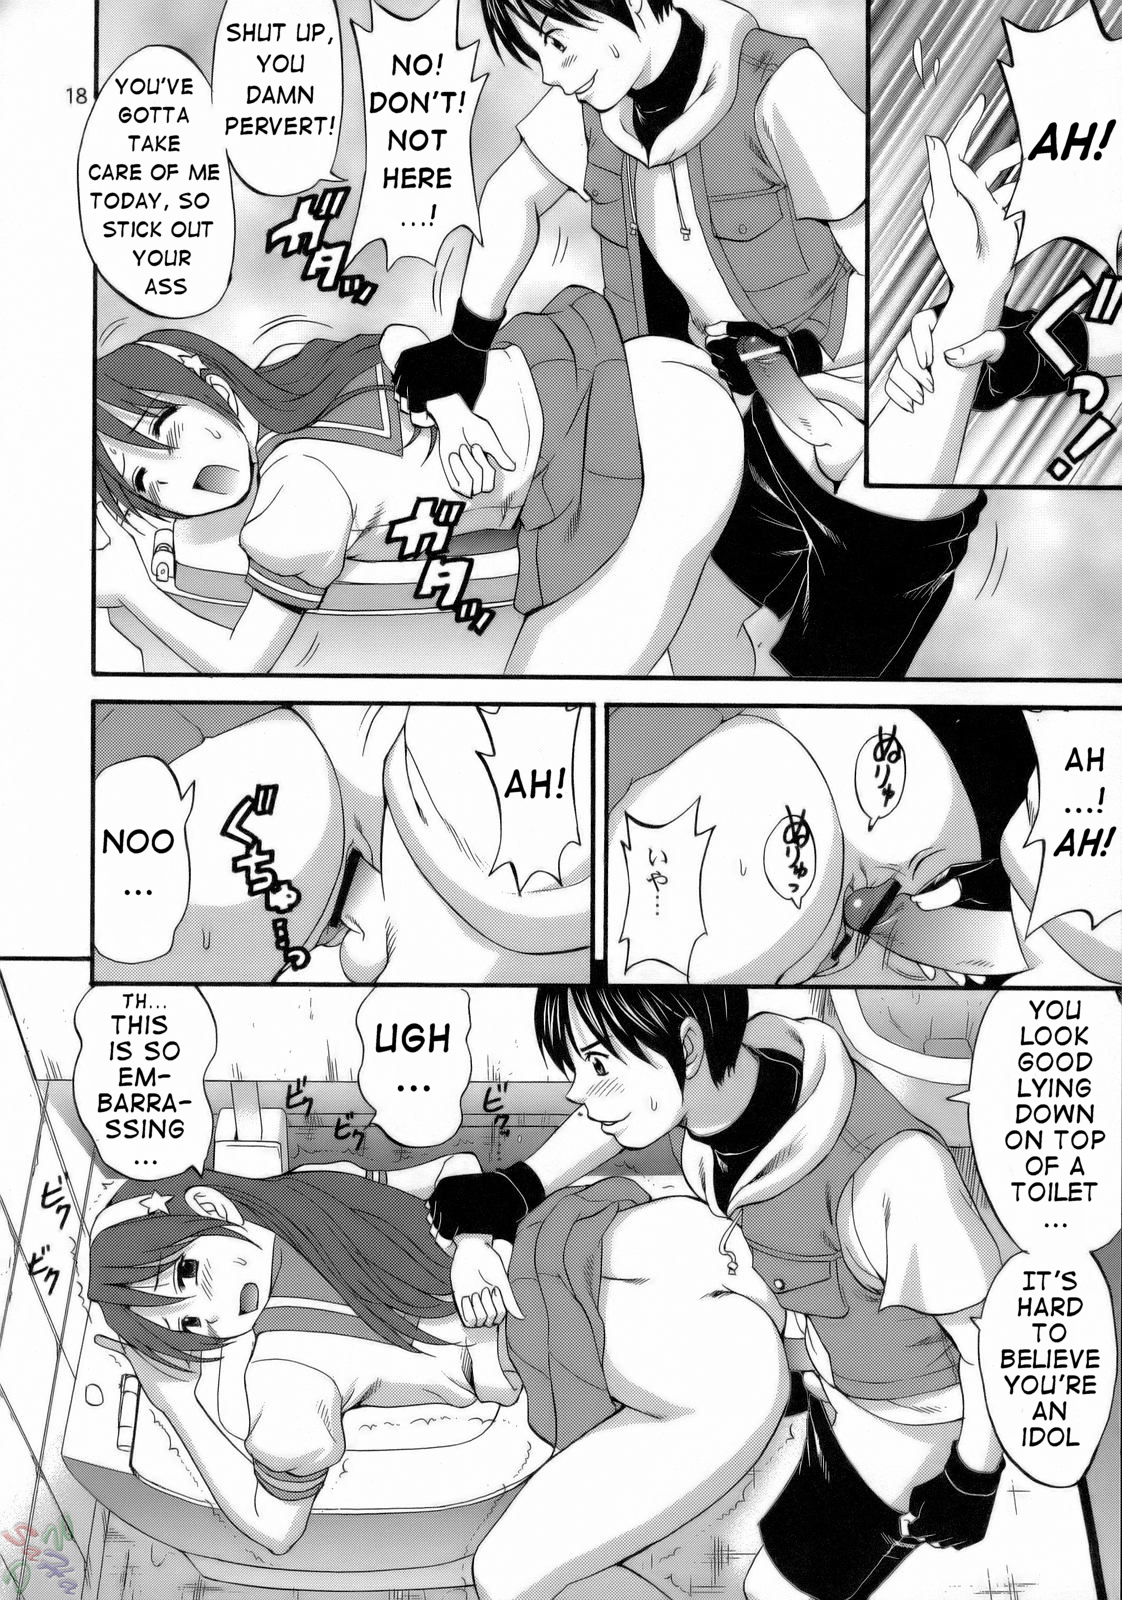 (C71) [Saigado] THE ATHENA & FRIENDS 2006 (King of Fighters) [English] [SaHa] page 17 full